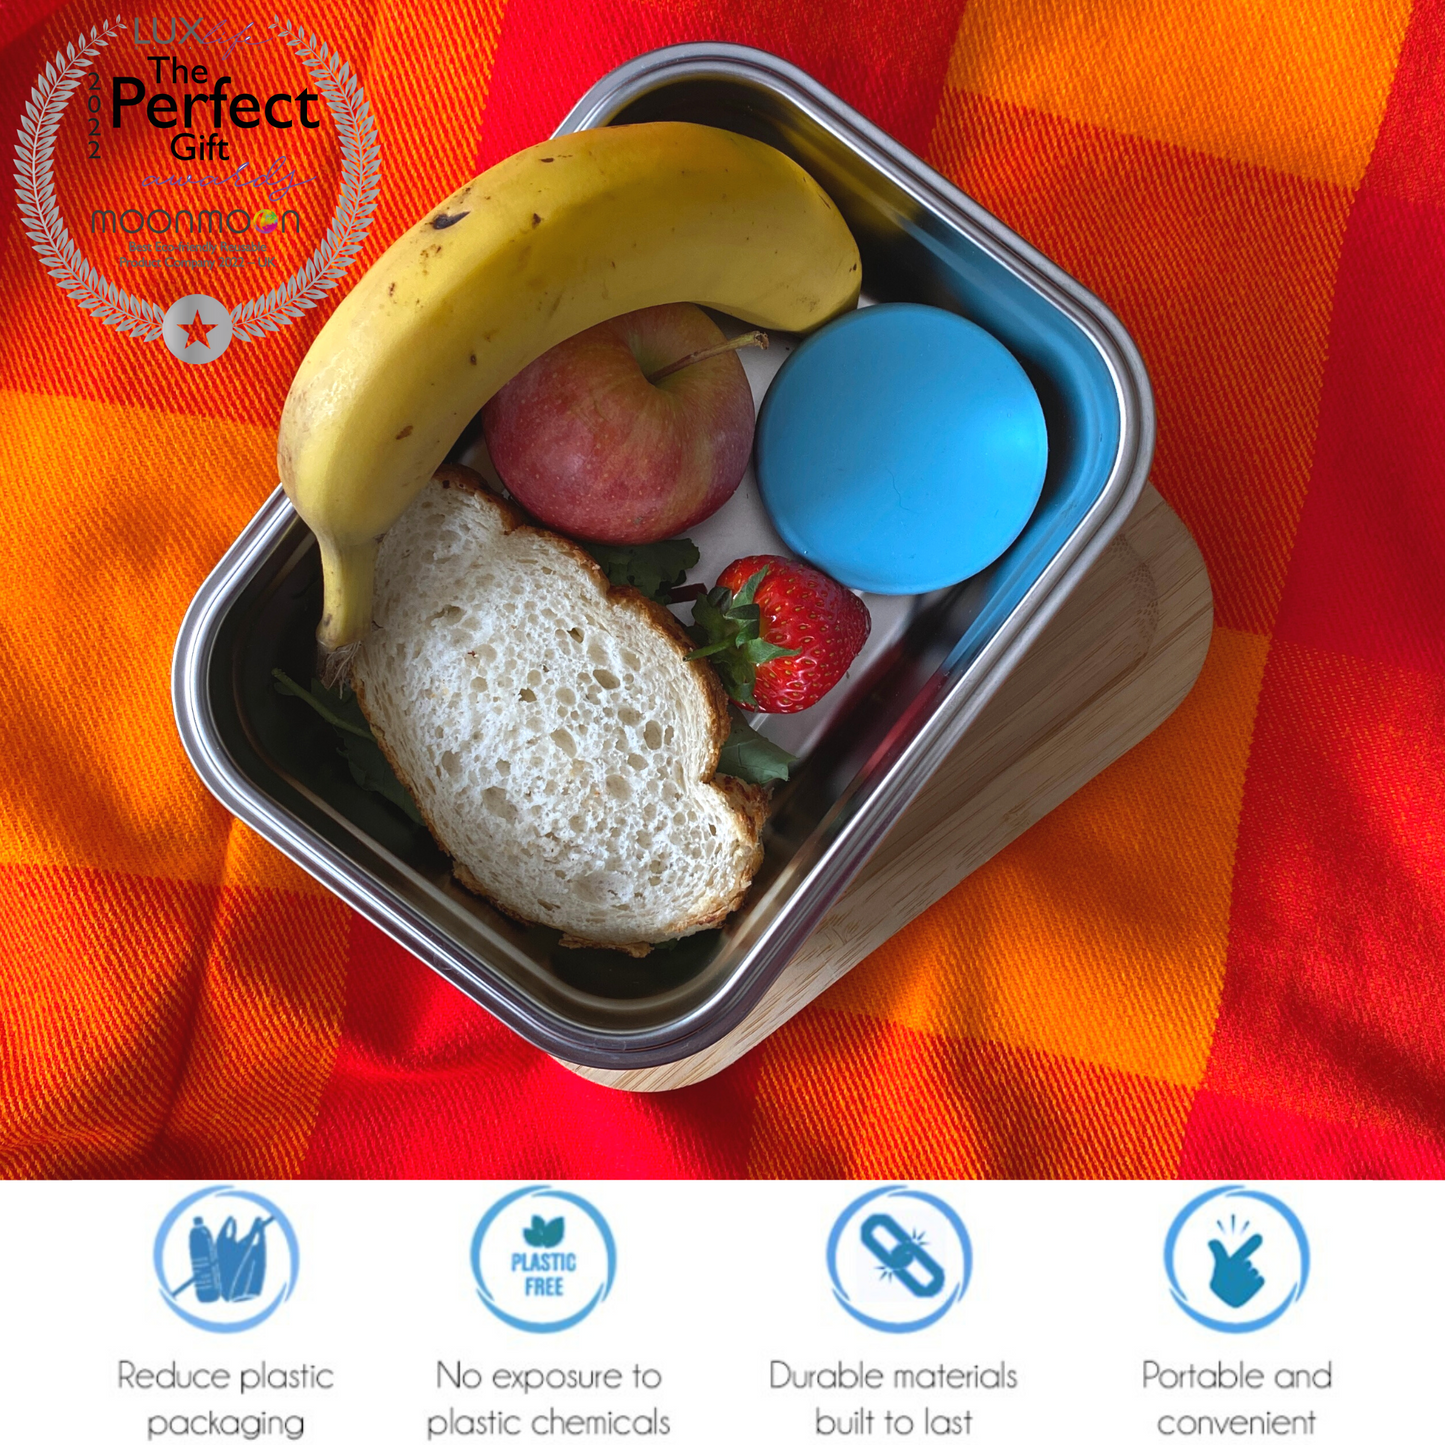 stainless steel lunch box UK, lunch box with lid, Moonmoon, eco-friendly, eco stainless steel lunch box uk, sandwich box, stainless steel and bamboo lunch box, black and blum lunch box